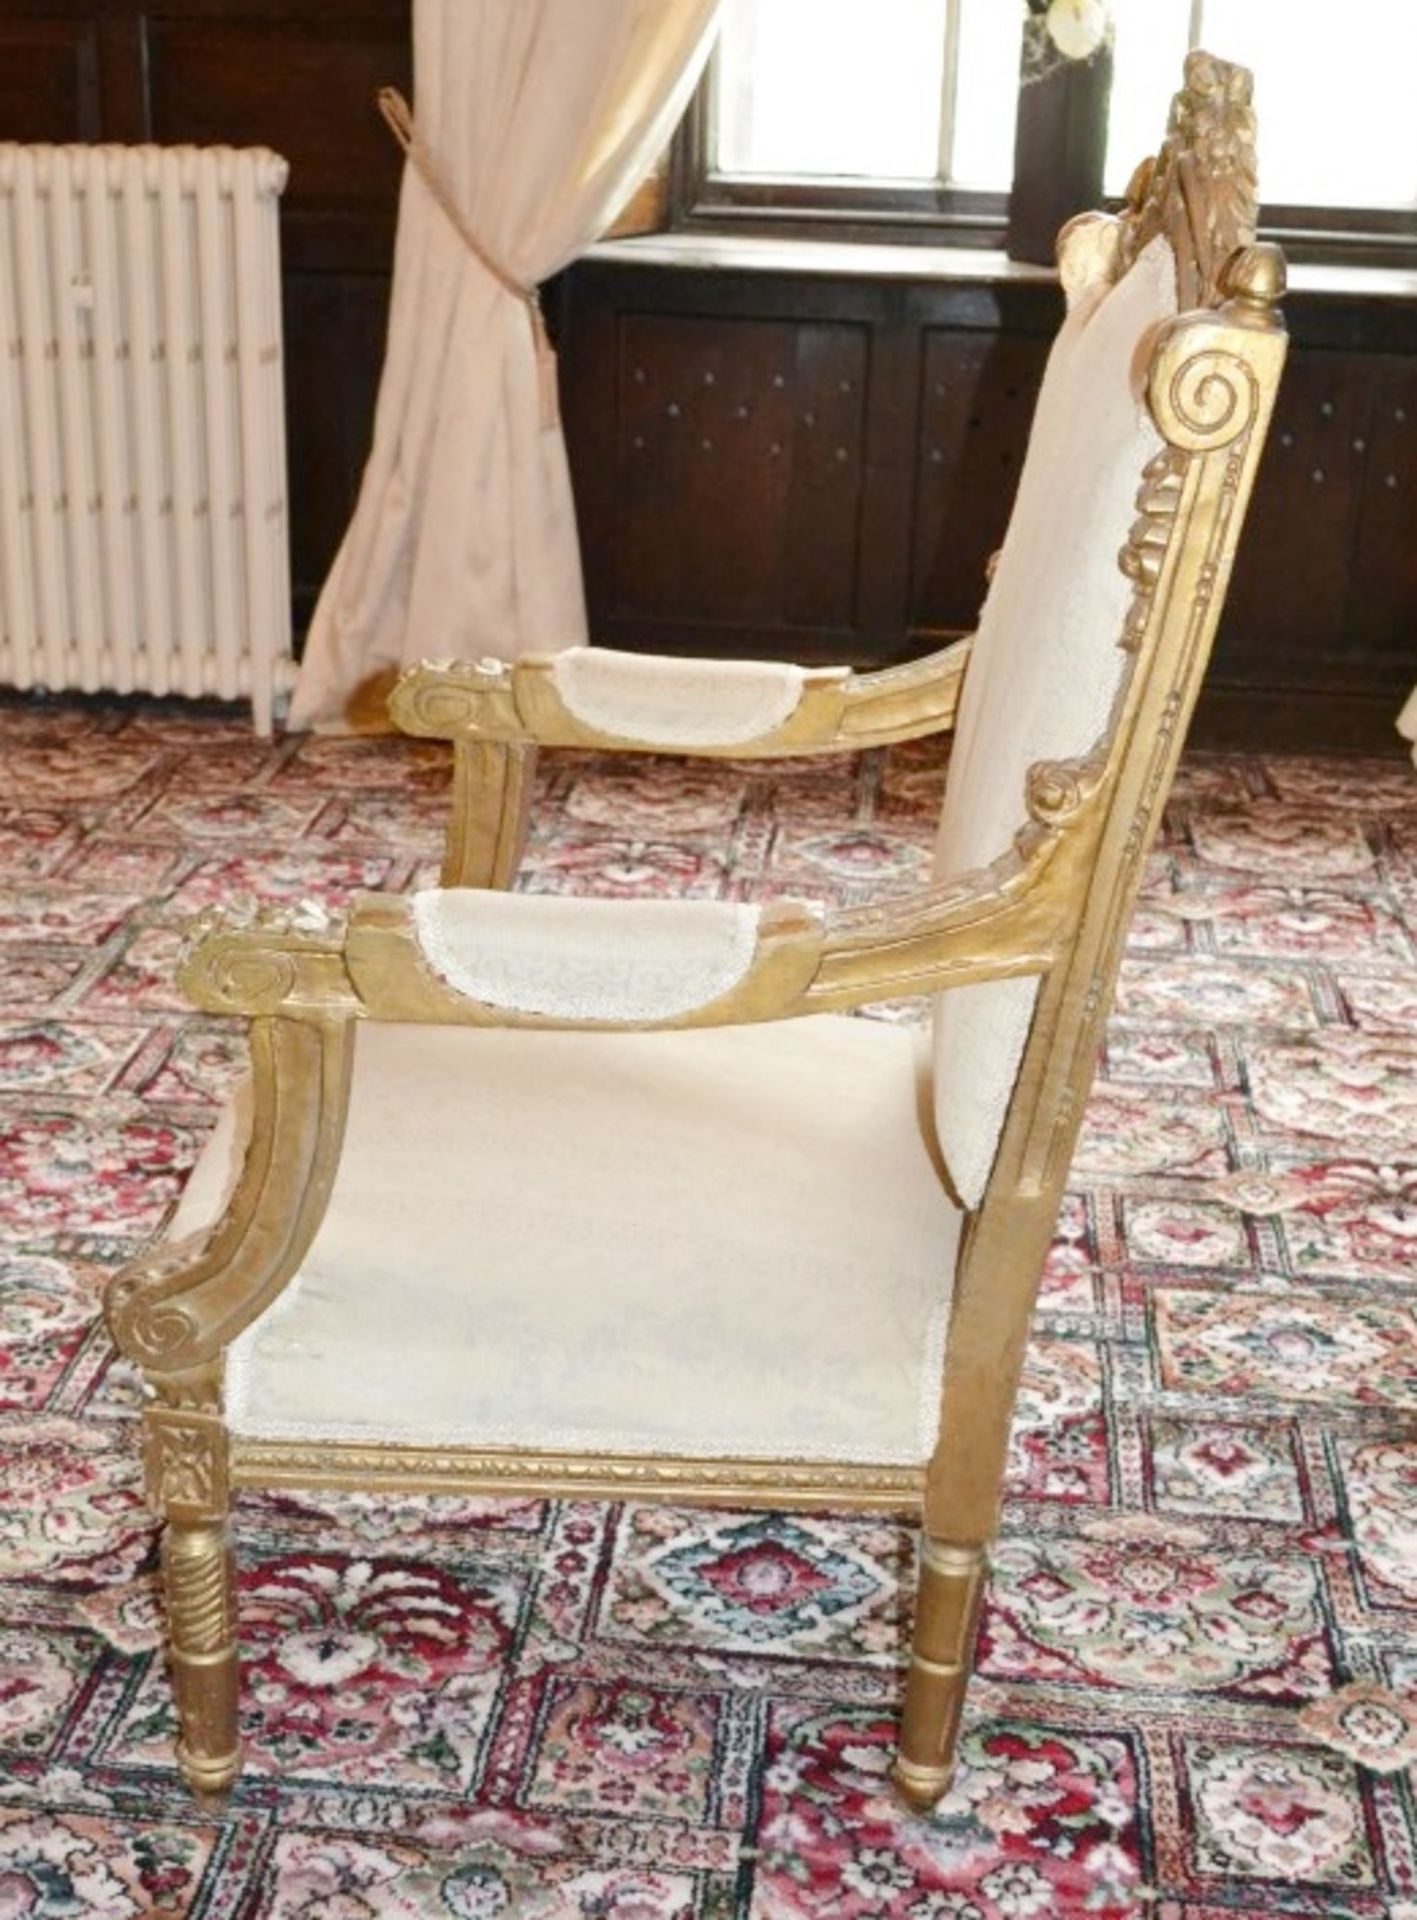 1 x Period Gold Gilt Armchair - Upholstered In A Rich Cream Fabric - From A Grade II Listed Hall - Image 2 of 9